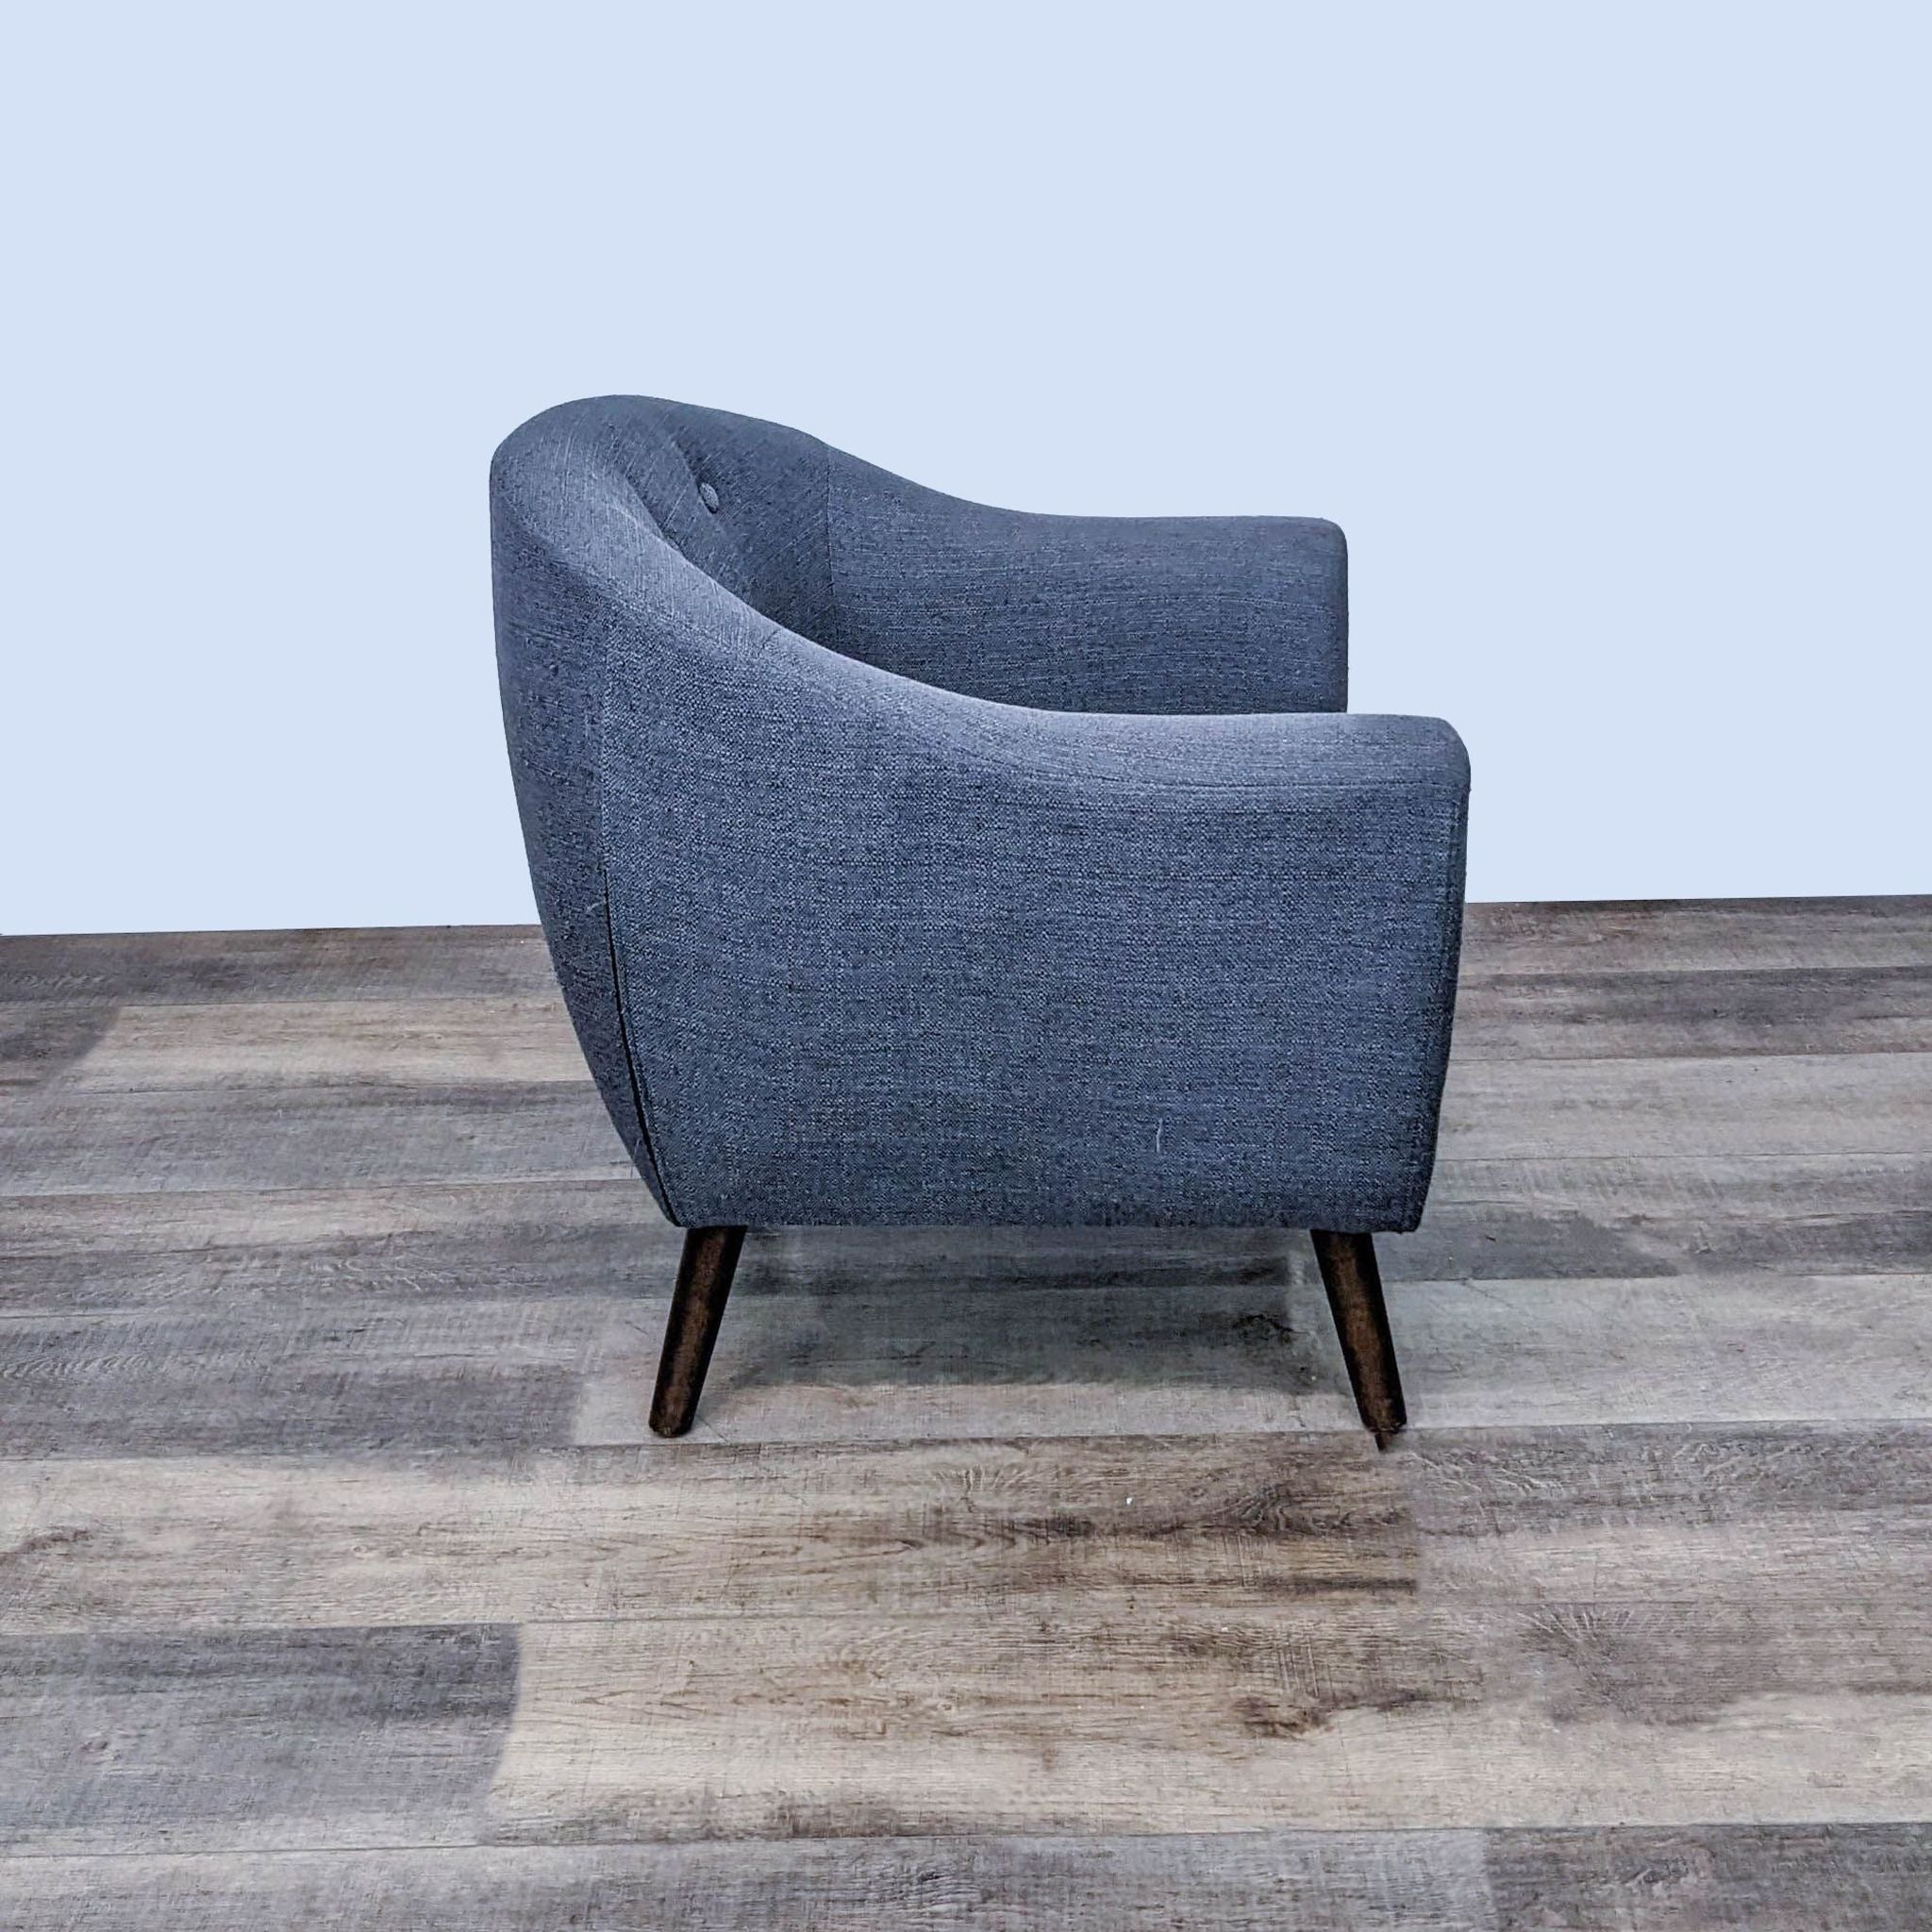 Reperch branded mid-century upholstered chair, shown from the side and back, highlighting the curved shape.